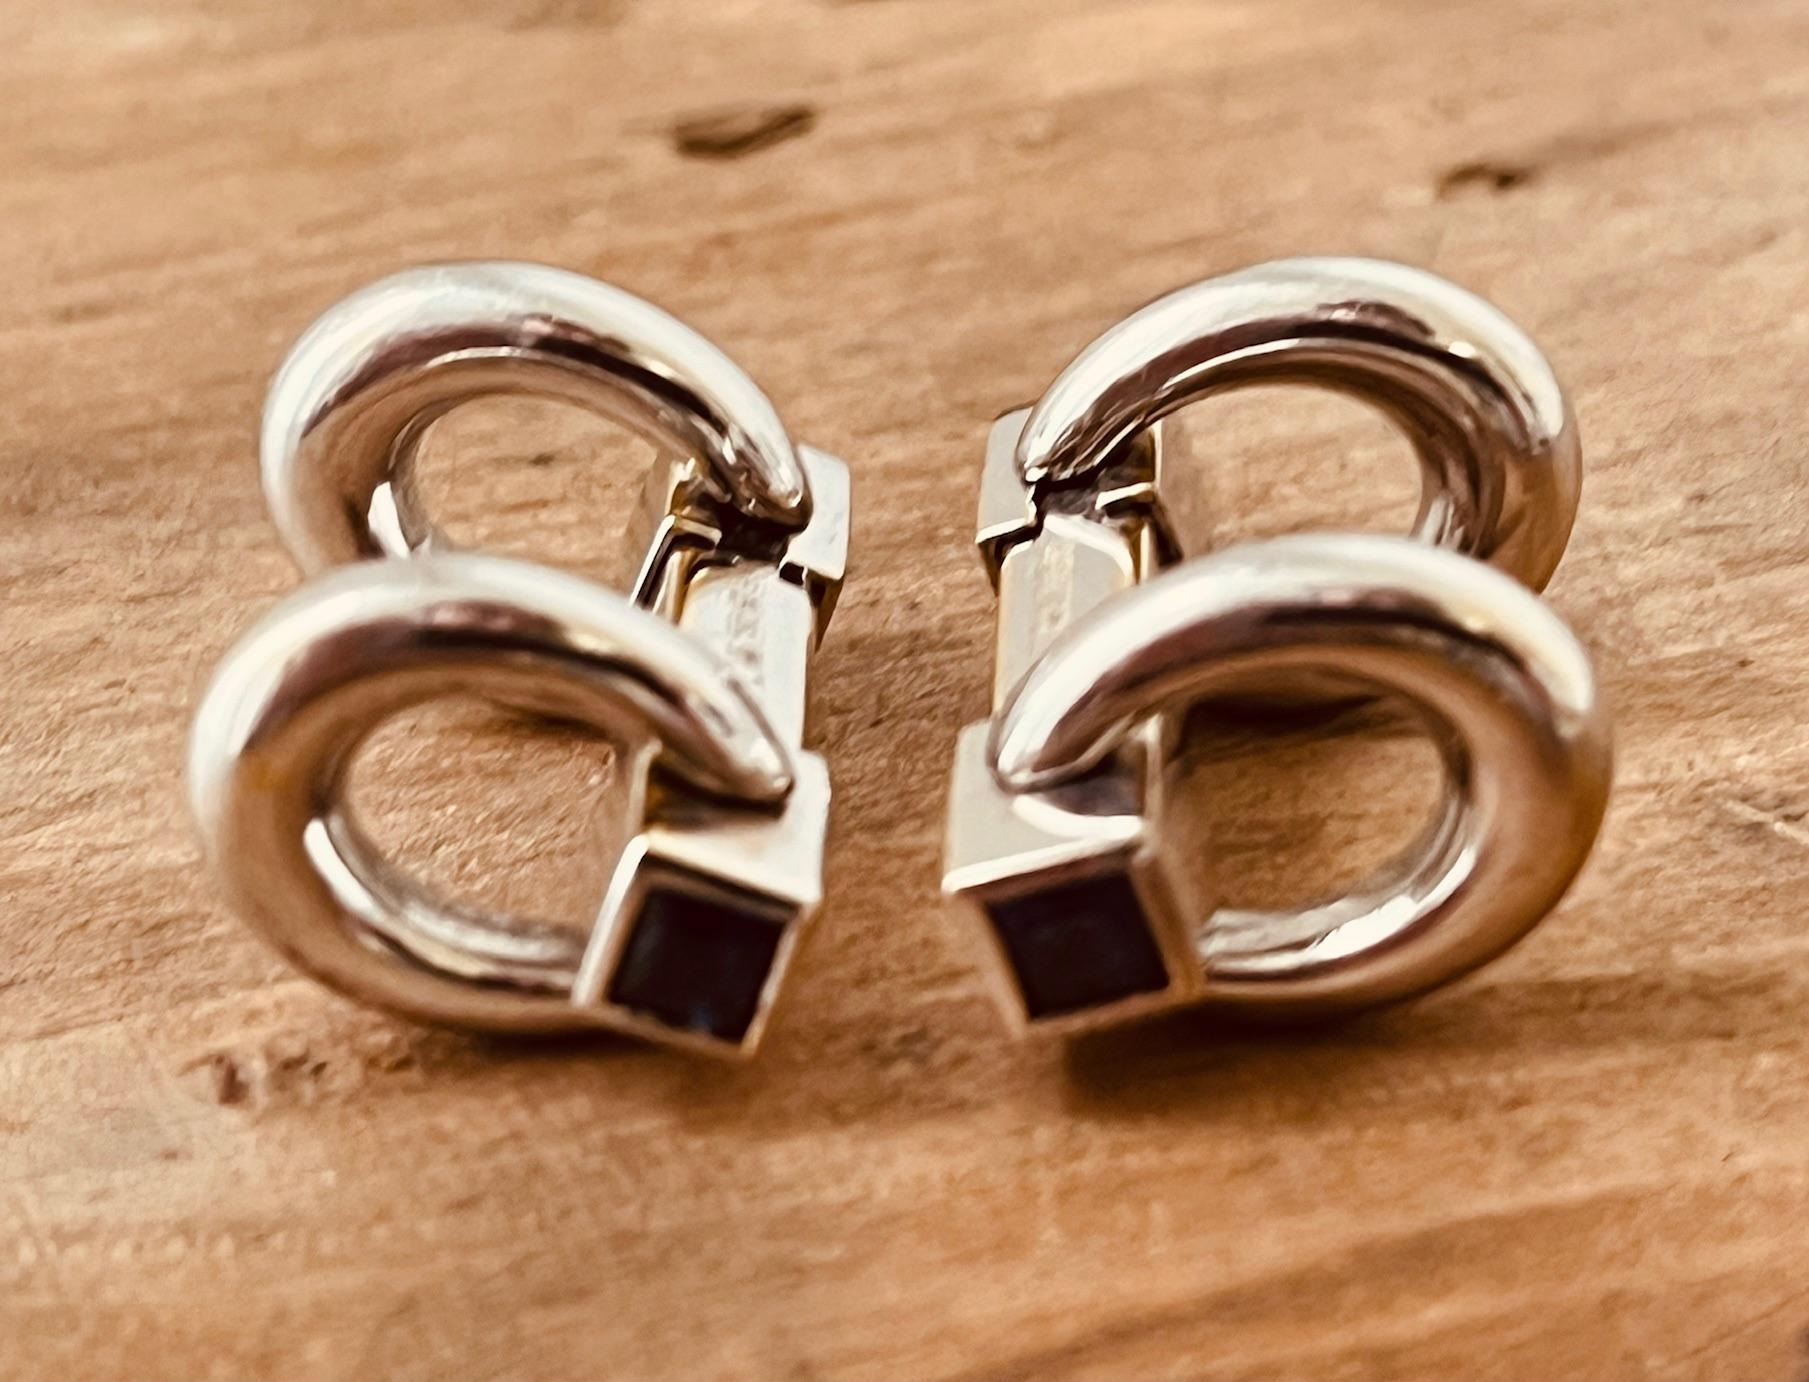 LONGMIRE, London. A pair of 18ct white gold bar cufflinks with Sapphire terminals. Weight: 19.7g. Signed in full with English hallmarks for 18ct 2004. Price: 4,650£. Item is in very good condition without any damage. Return policy within 3 days is